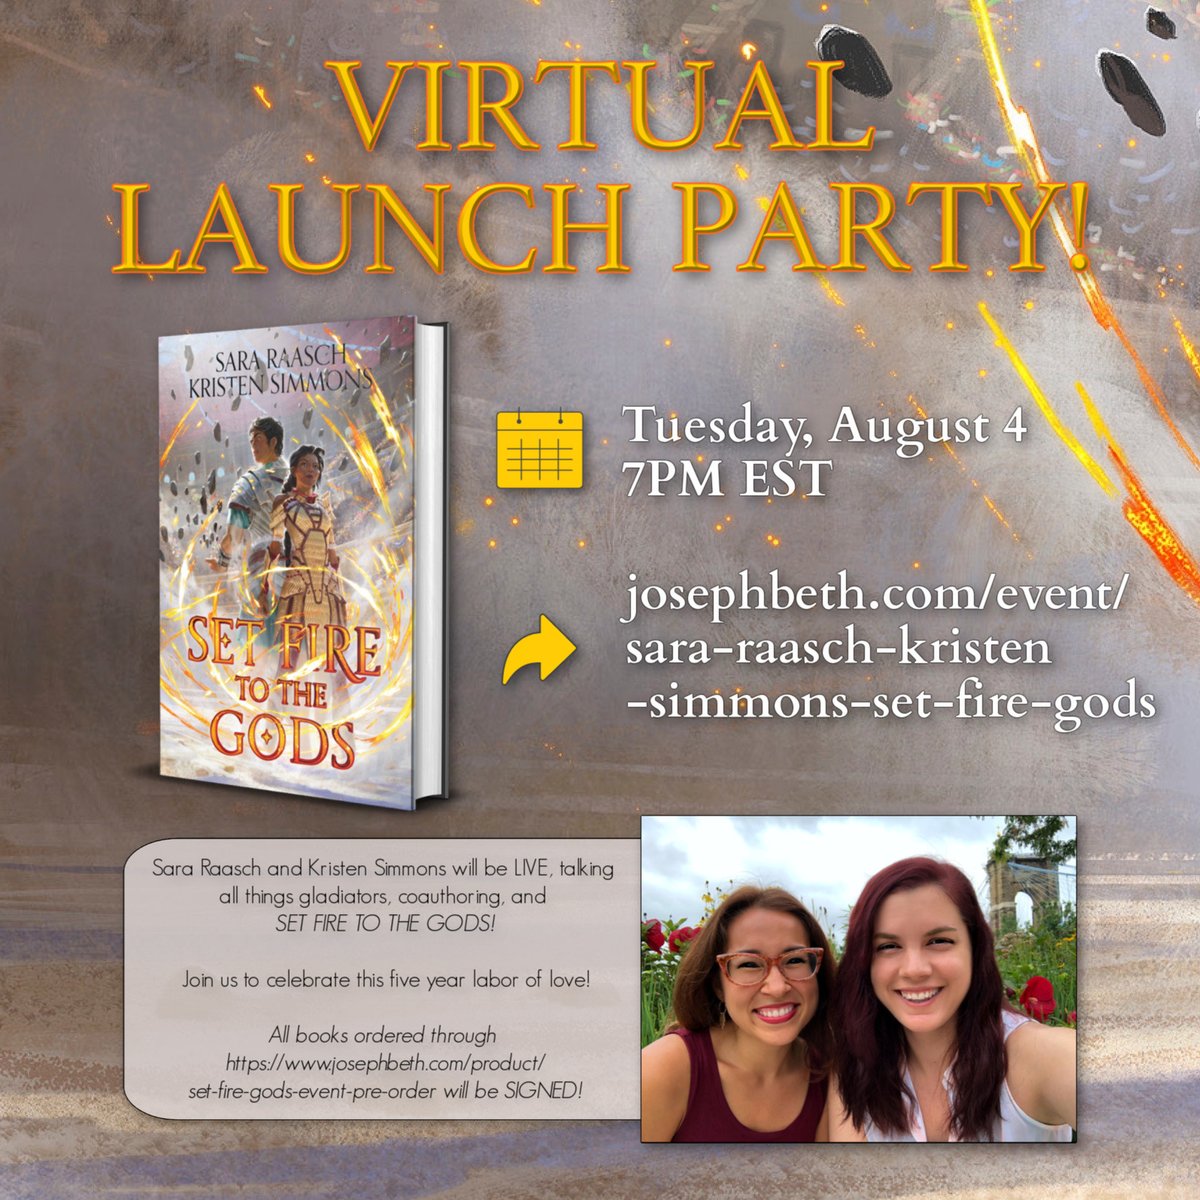 If you want to hear more about SET FIRE's SO VERY TRUE ACTUALLY REAL origins, tune in to our virtual launch party TOMORROW at 7PM EST! It's being hosted by the one, the only,  @JosephBethCincy!